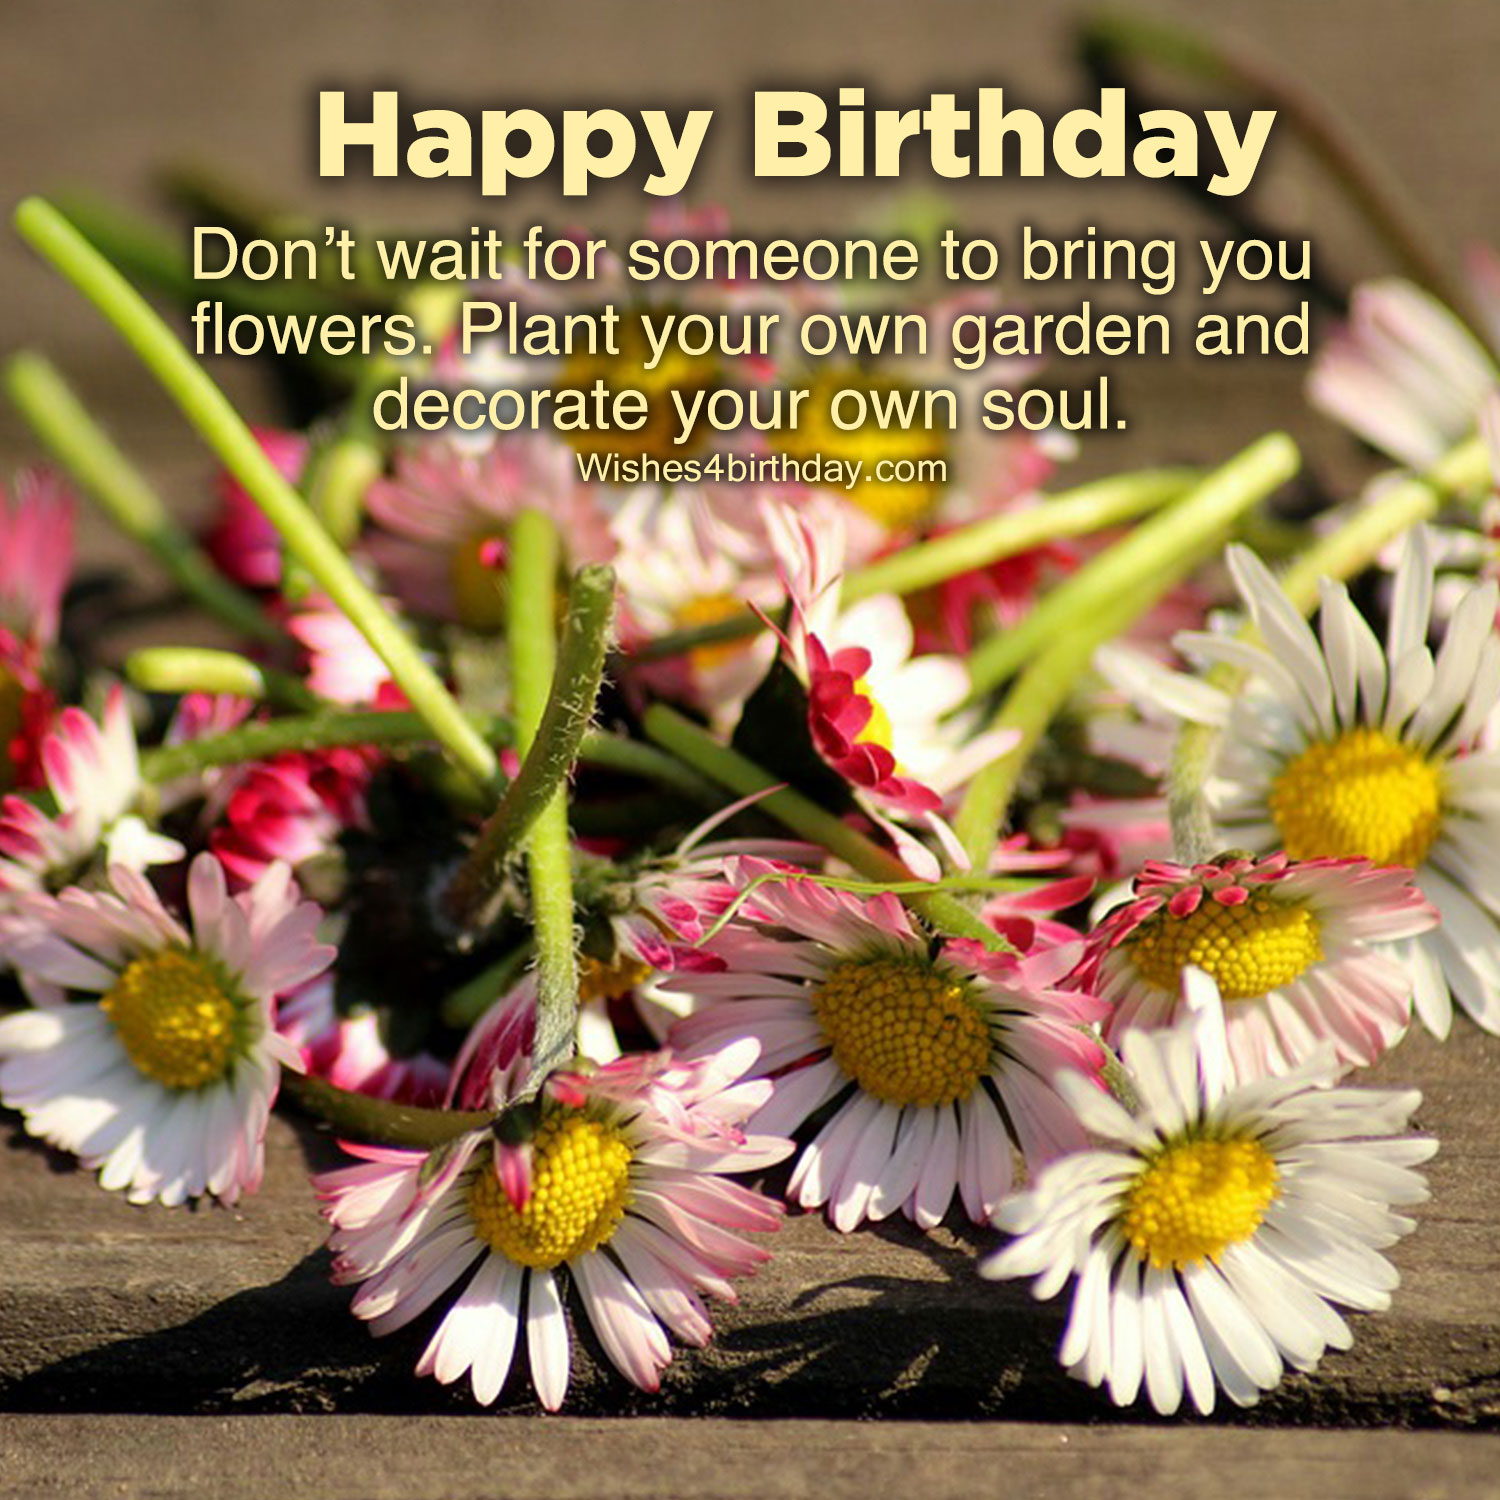 Top animated Birthday images quotes for her - Happy Birthday Wishes, Memes,  SMS & Greeting eCard Images